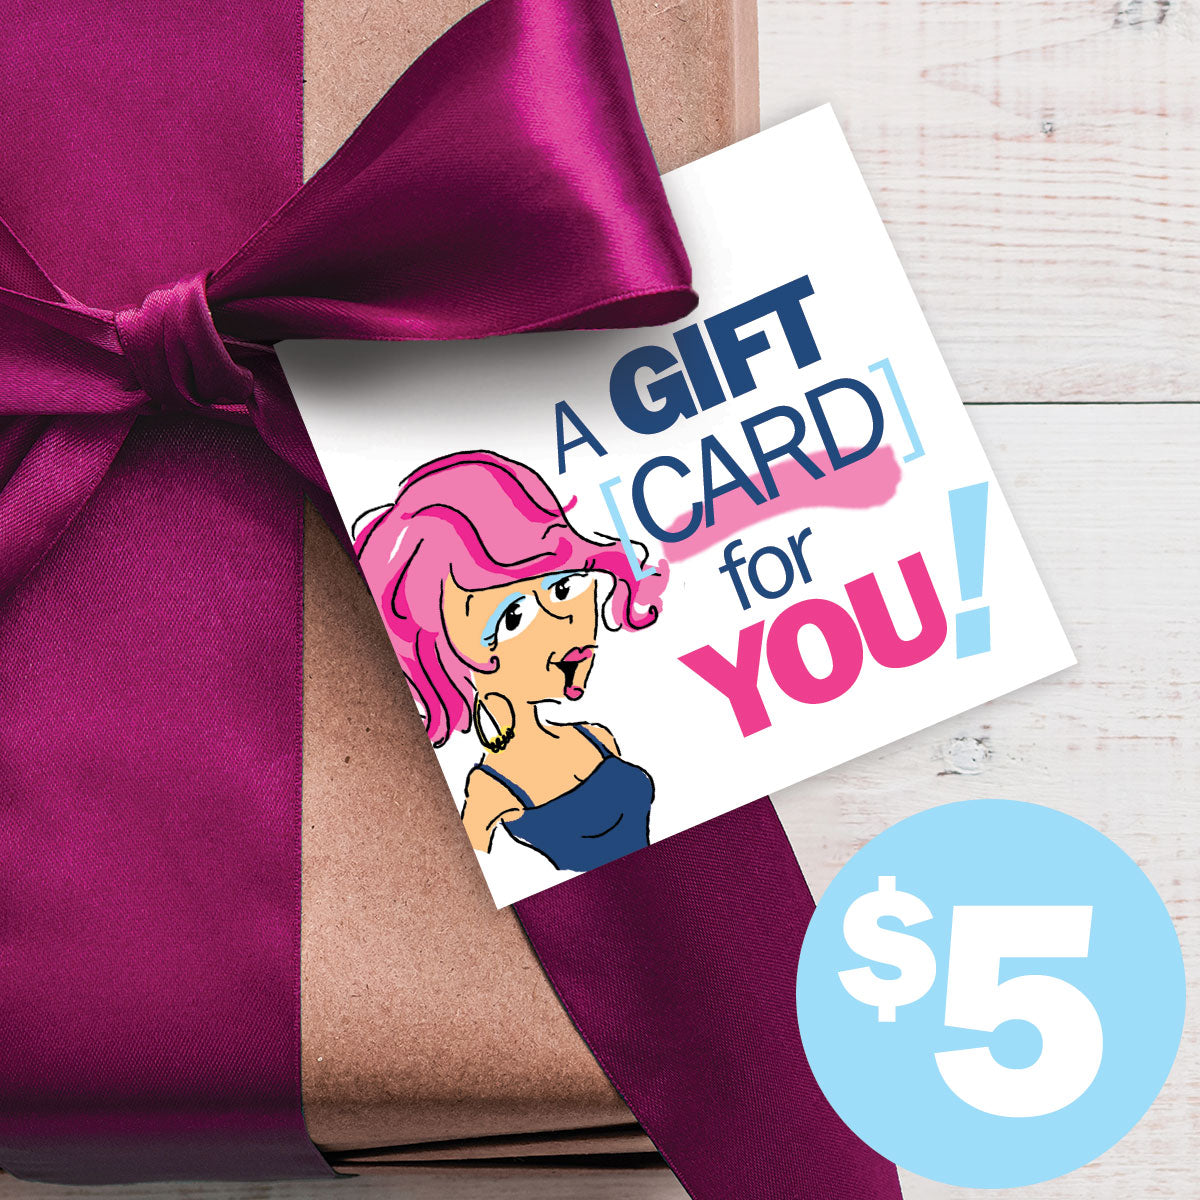 Top 5 Gift Cards for Kids and Teens | GiftCardGranny